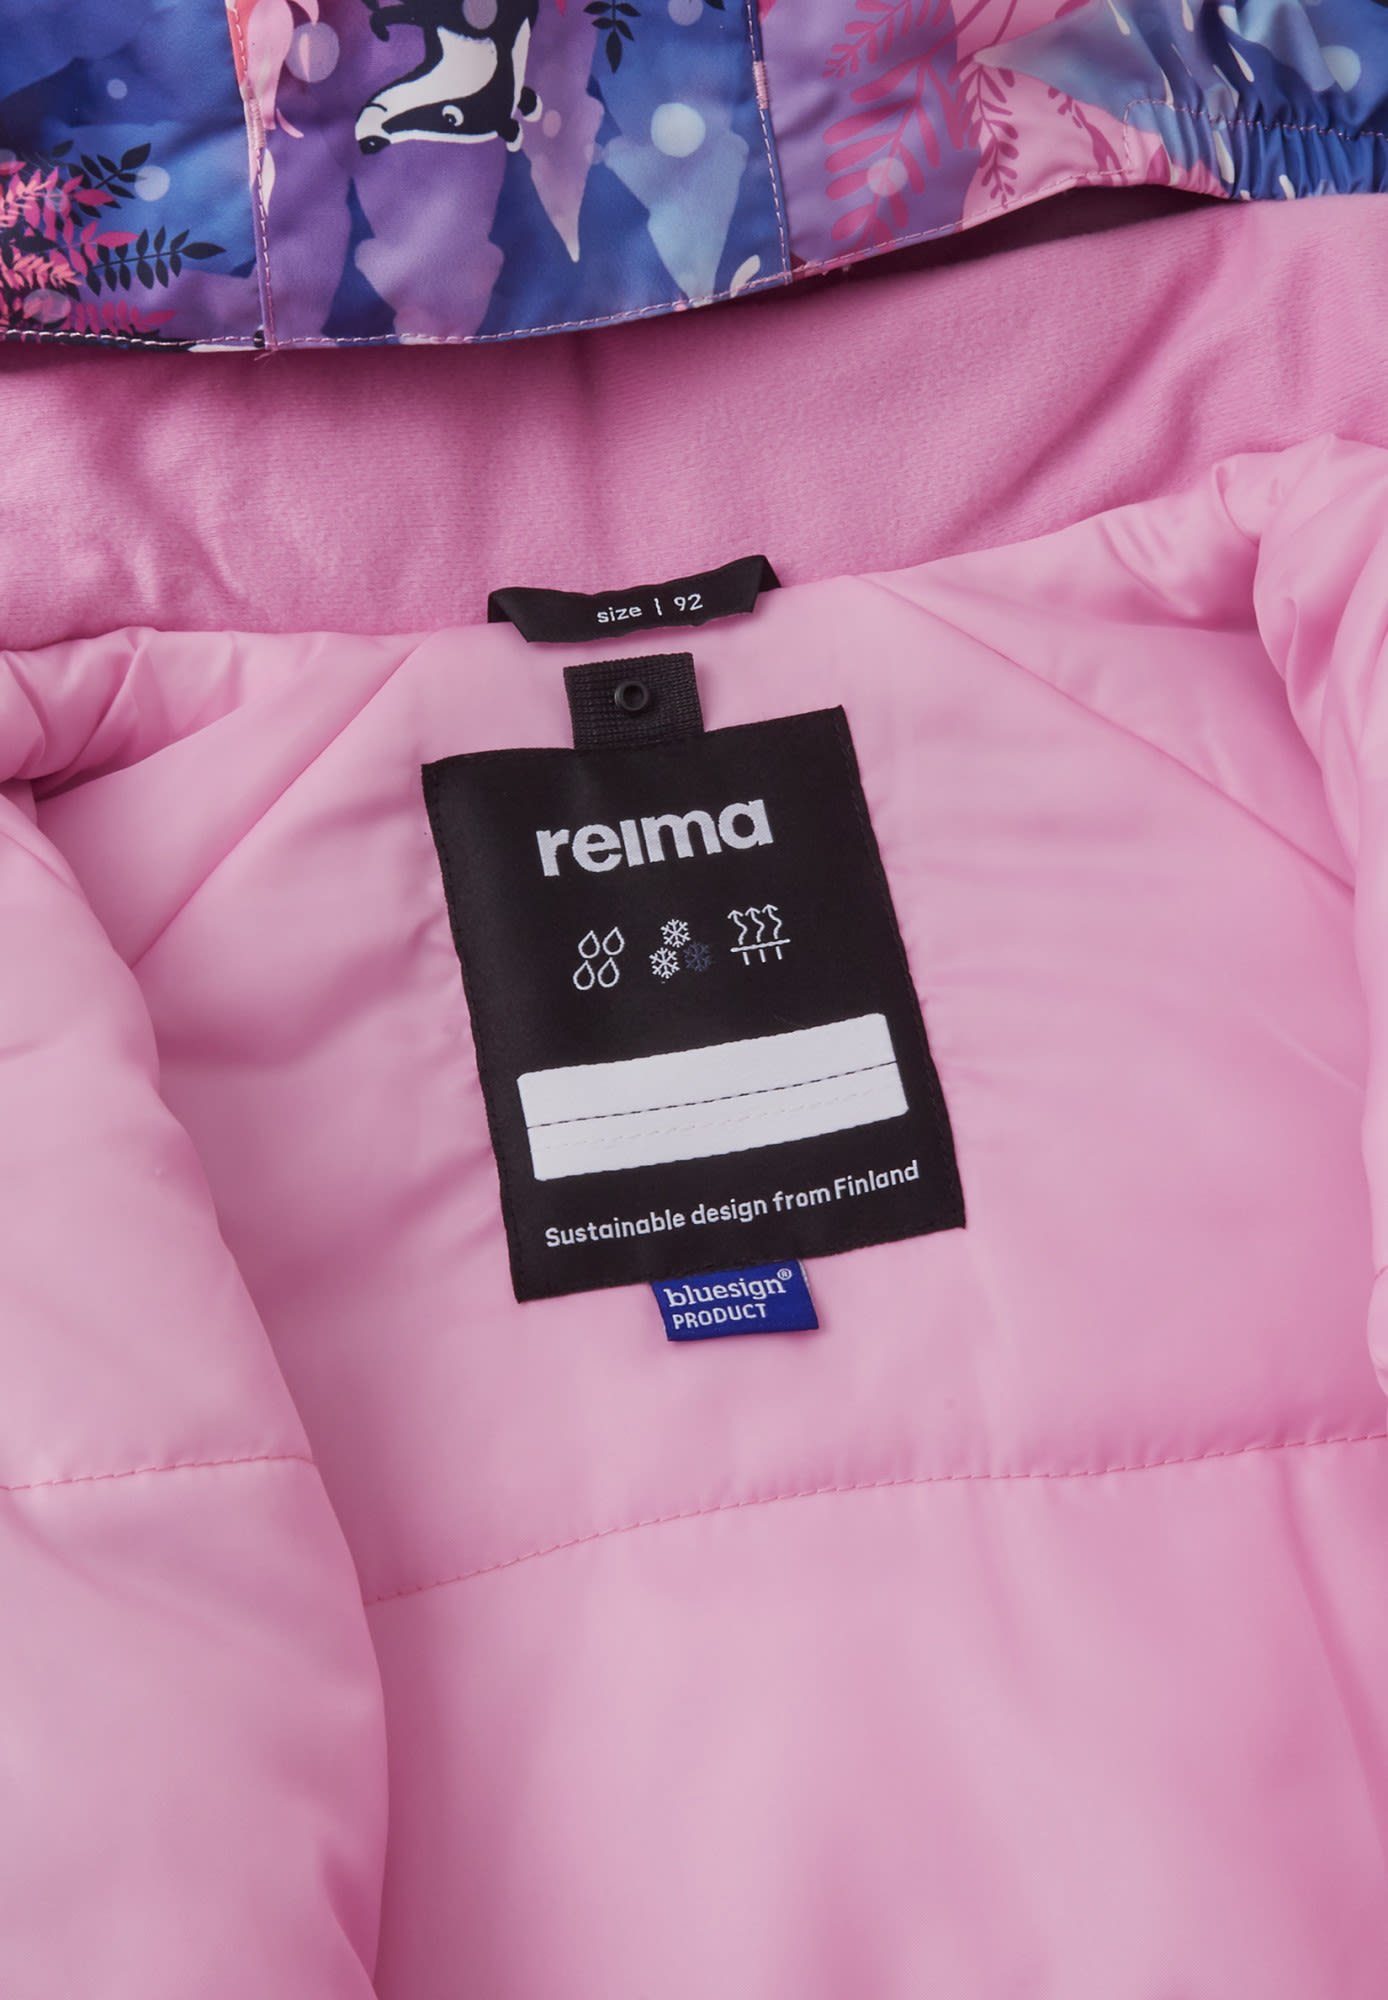 Reima Kinder Winter Toddlers Classic reima Overall Pink Overall Langnes